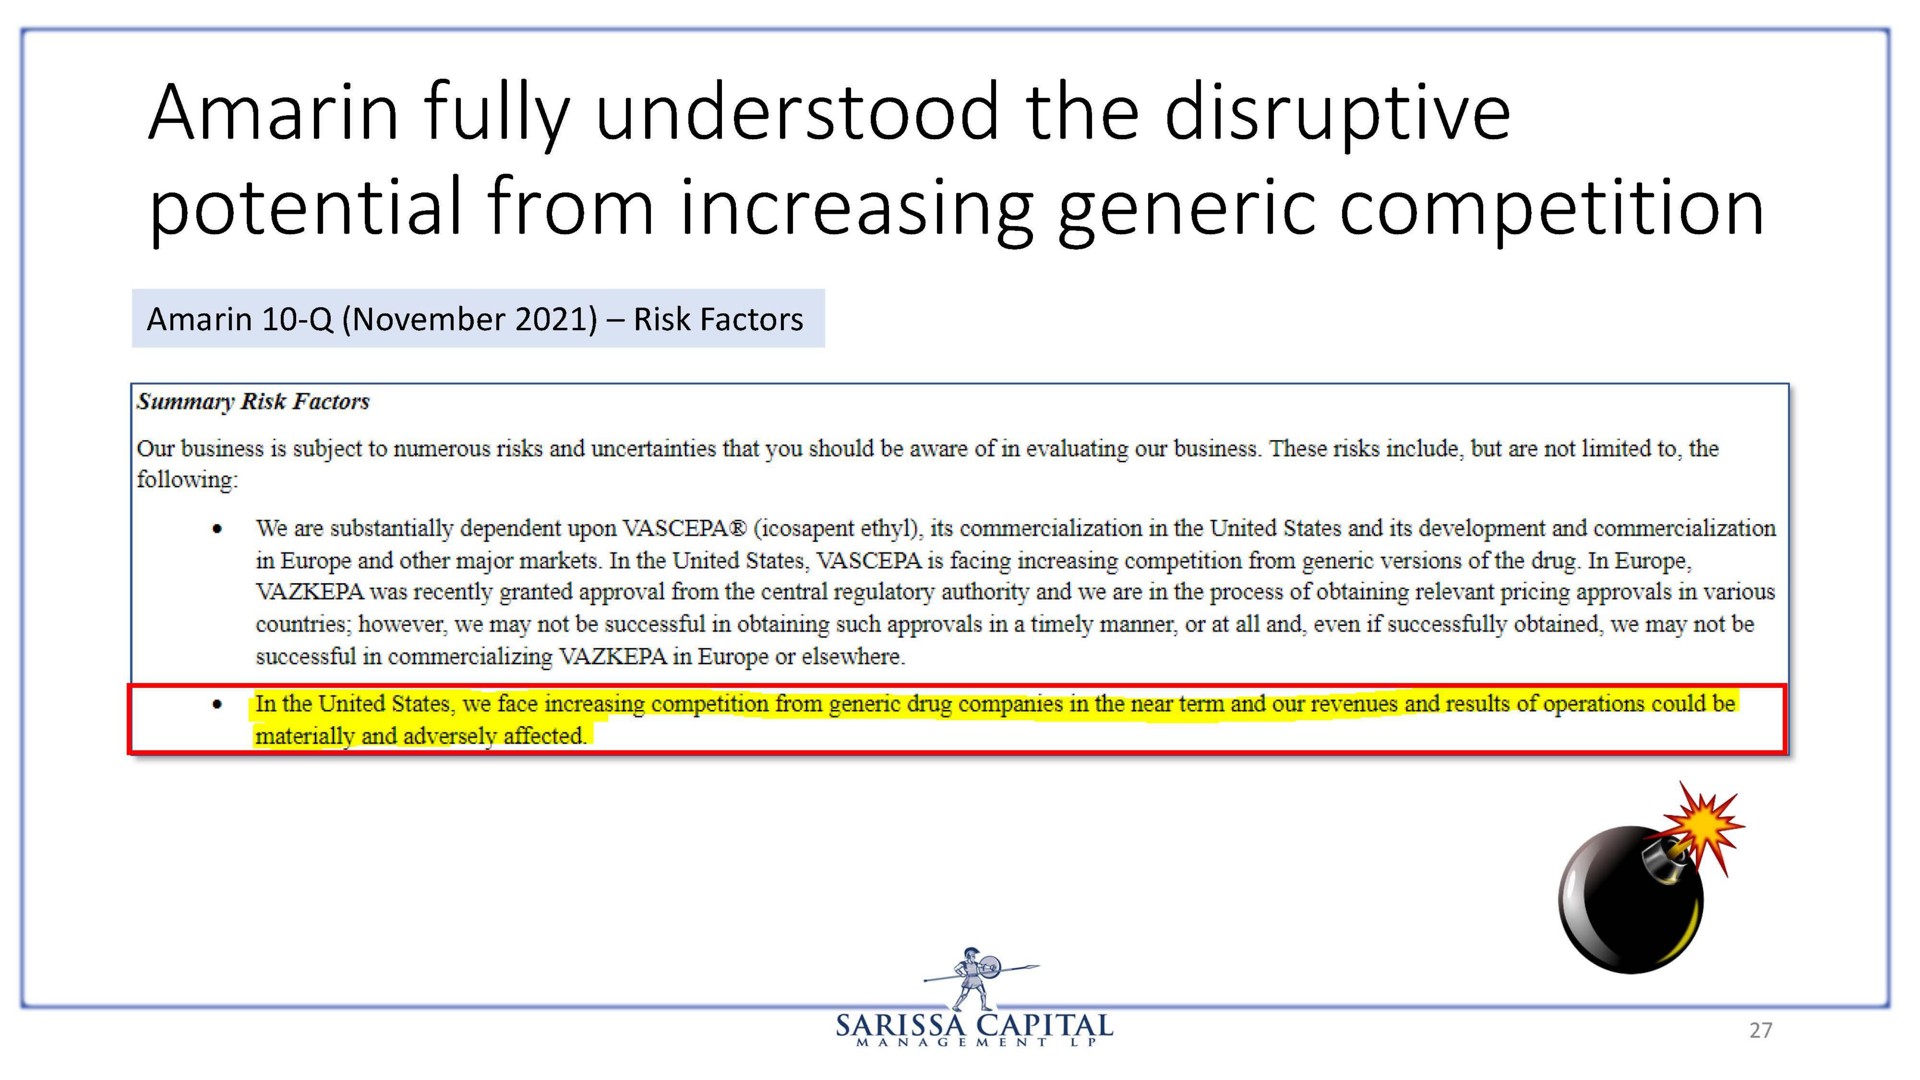 amarin fully understood the disruptive potential from increasing generic competition | Sarissa Capital